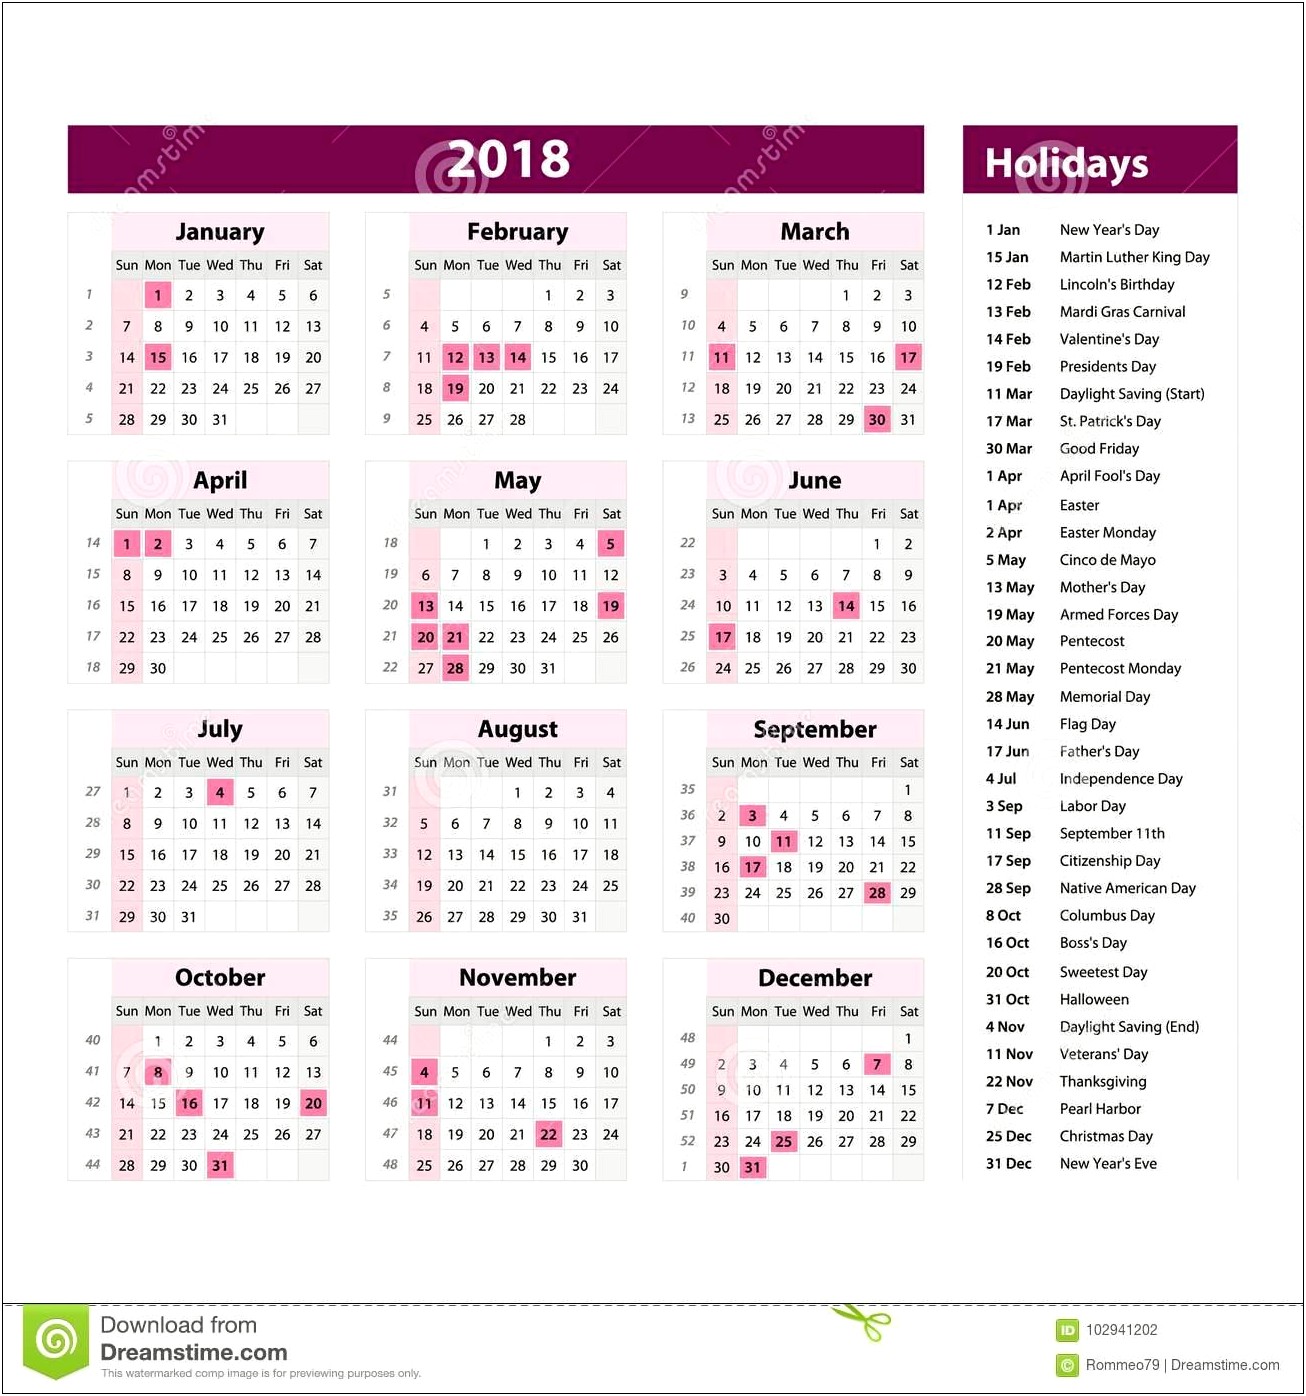 Free Calendar Template With Holidays 2018